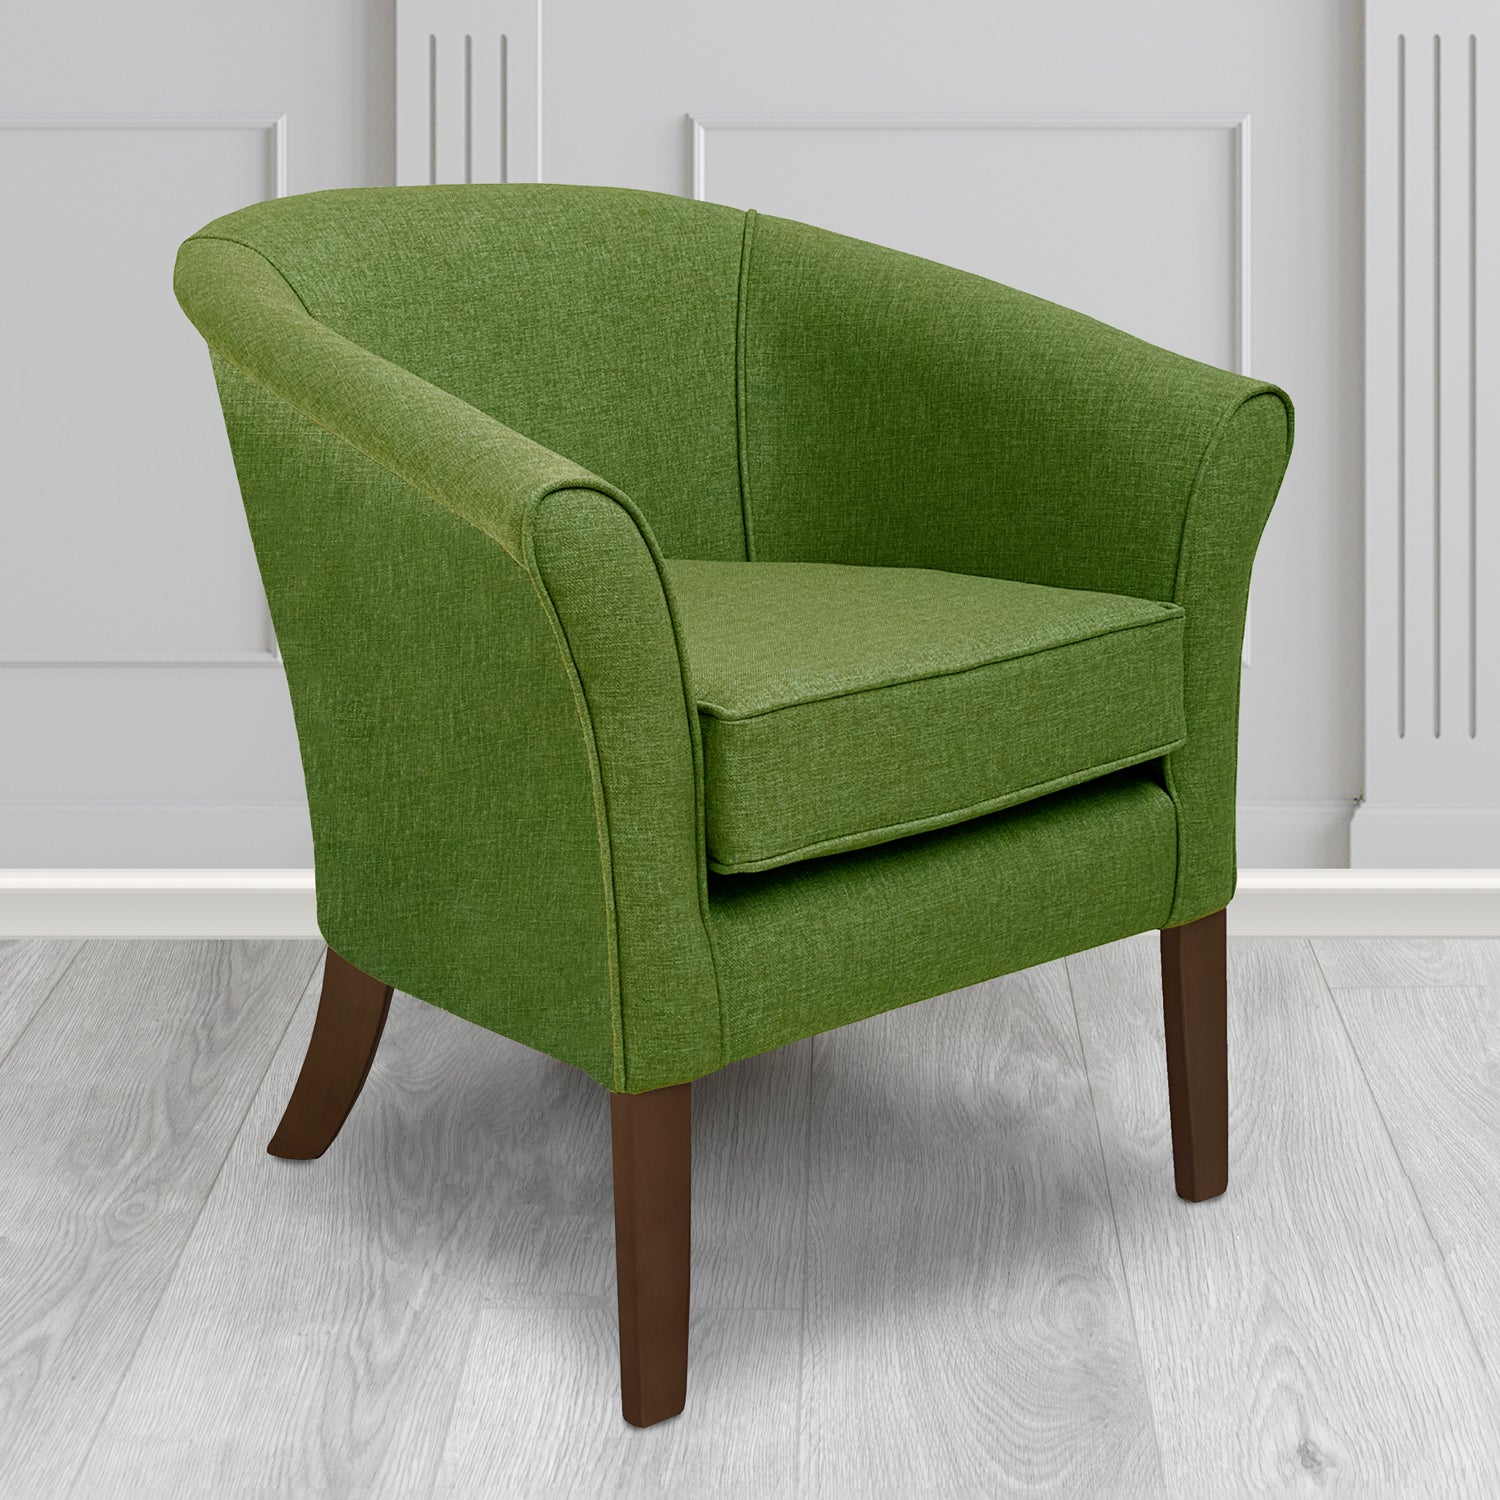 Aspen Tub Chair in Marna 231 Olive Crib 5 Fabric - Antimicrobial, Stain Resistant & Waterproof - The Tub Chair Shop